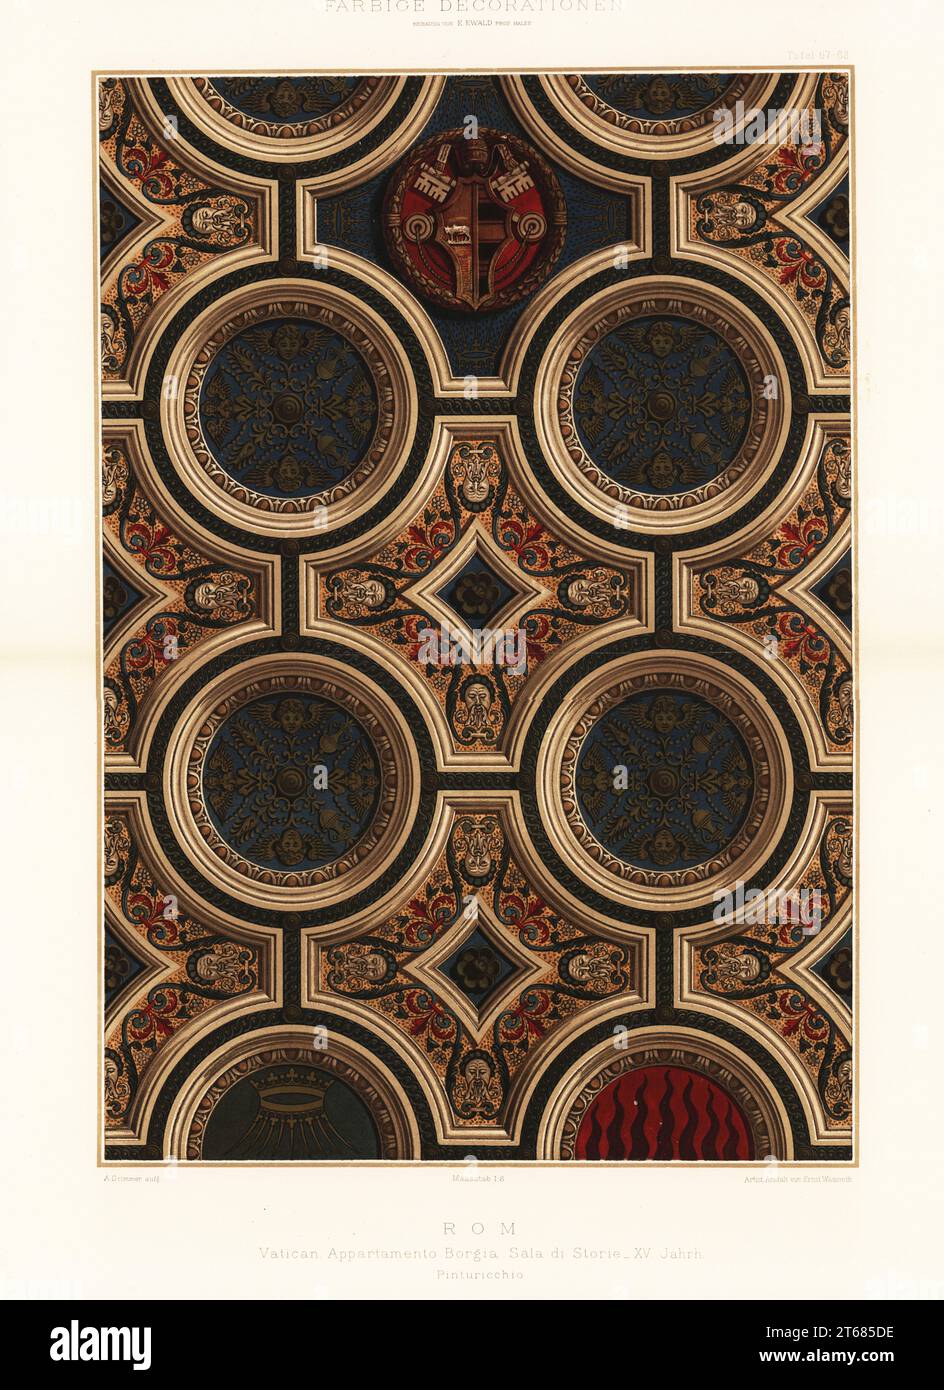 Ceiling fresco by Pinturicchio in the Borgia Apartments, the Vatican, Rome, 15th century. Vatican Appartiamento Borgia Sala di Storia, Pinturicchio, Rom. Chromolithograph after A. Grimmer from Ernst Ewalds Farbige decorationen, alter und never Zeit (Color decoration, ancient and new eras), Ernst Wasmuth, Berlin, 1889. Stock Photo